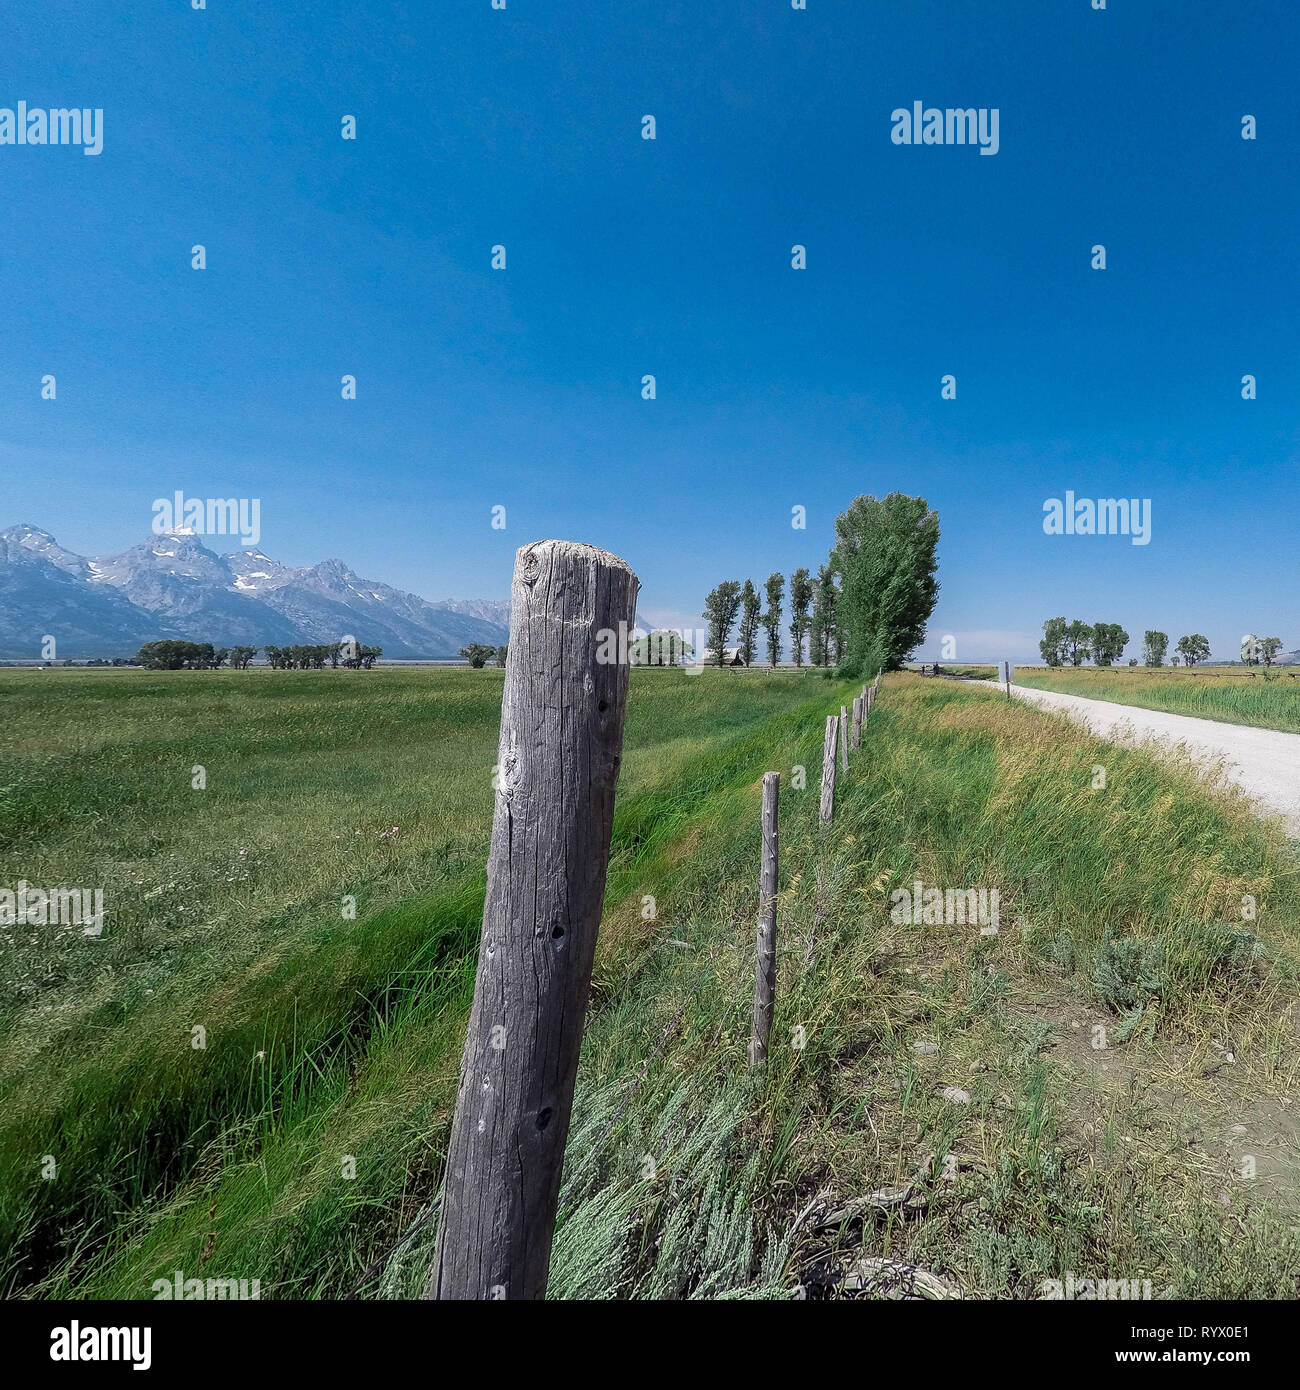 A country scene from Mormon Row in Grand Teton National Park.  Old barns on a country farm in an open field Stock Photo